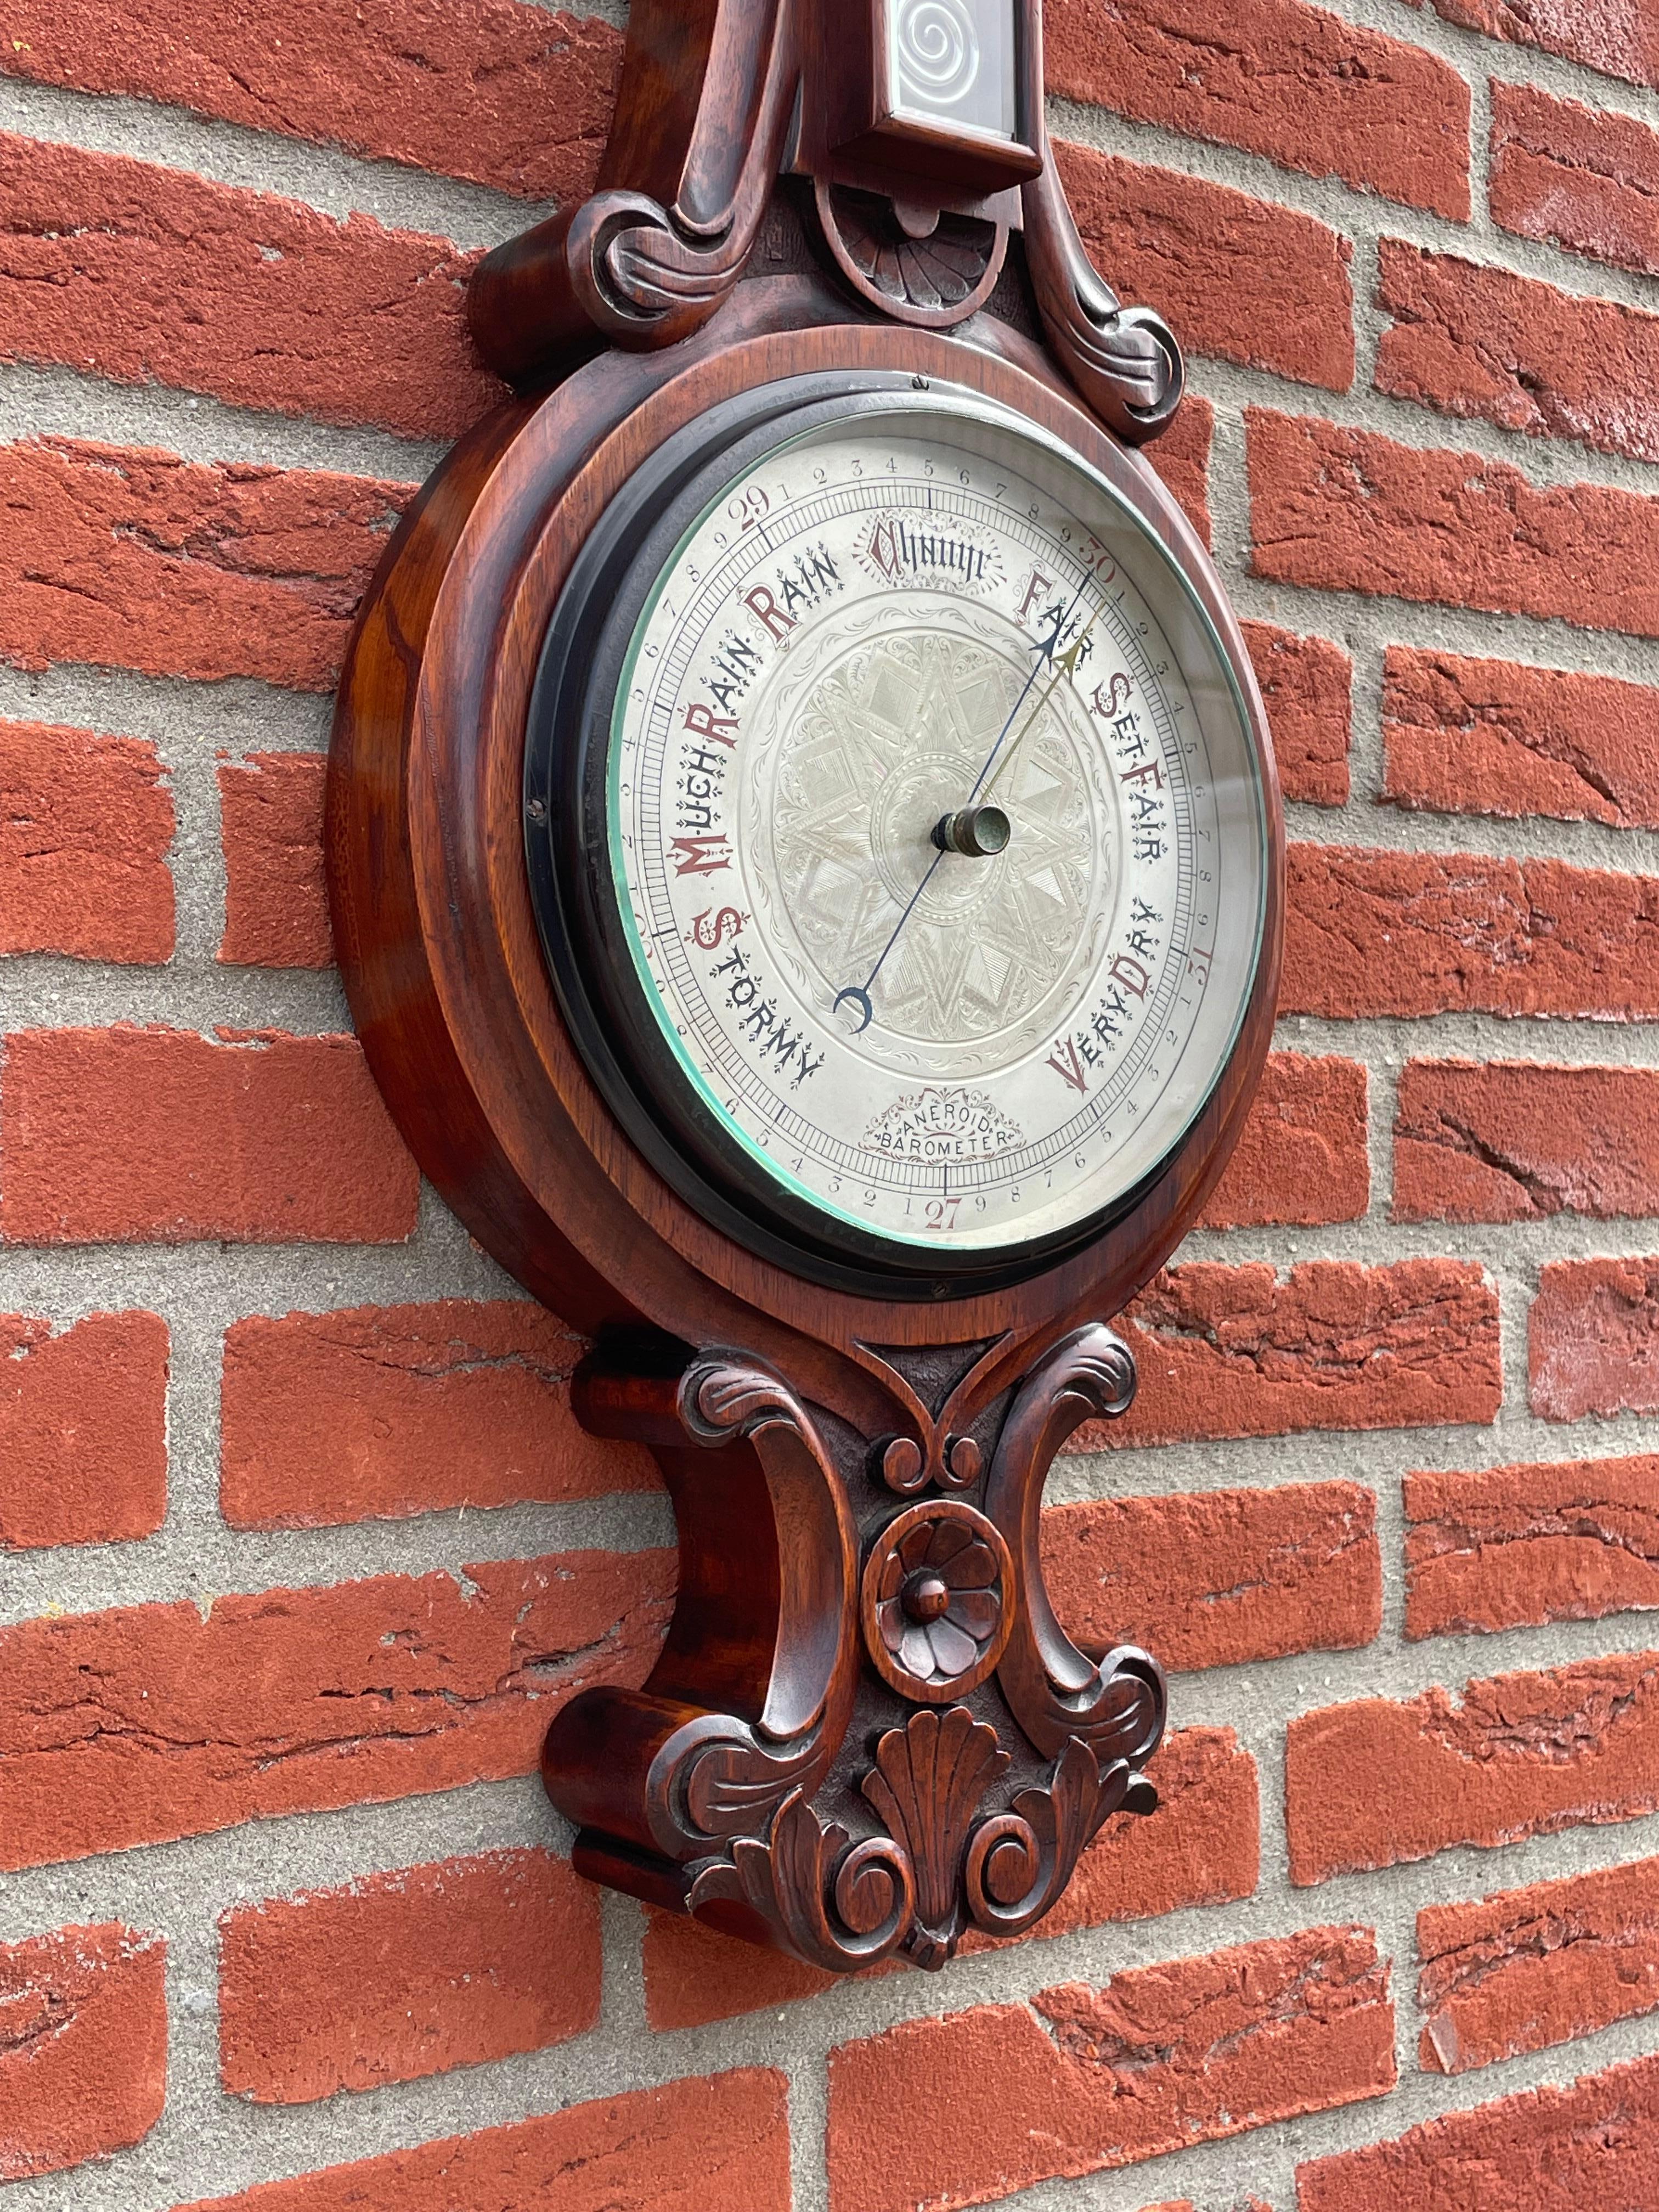 Stunning design and top quality carved antique barometer.

This late 1800s English wall barometer has everything that makes an antique worthwhile. The quality of the workmanship is second to none. The carvings in this large, thick and heavy wooden